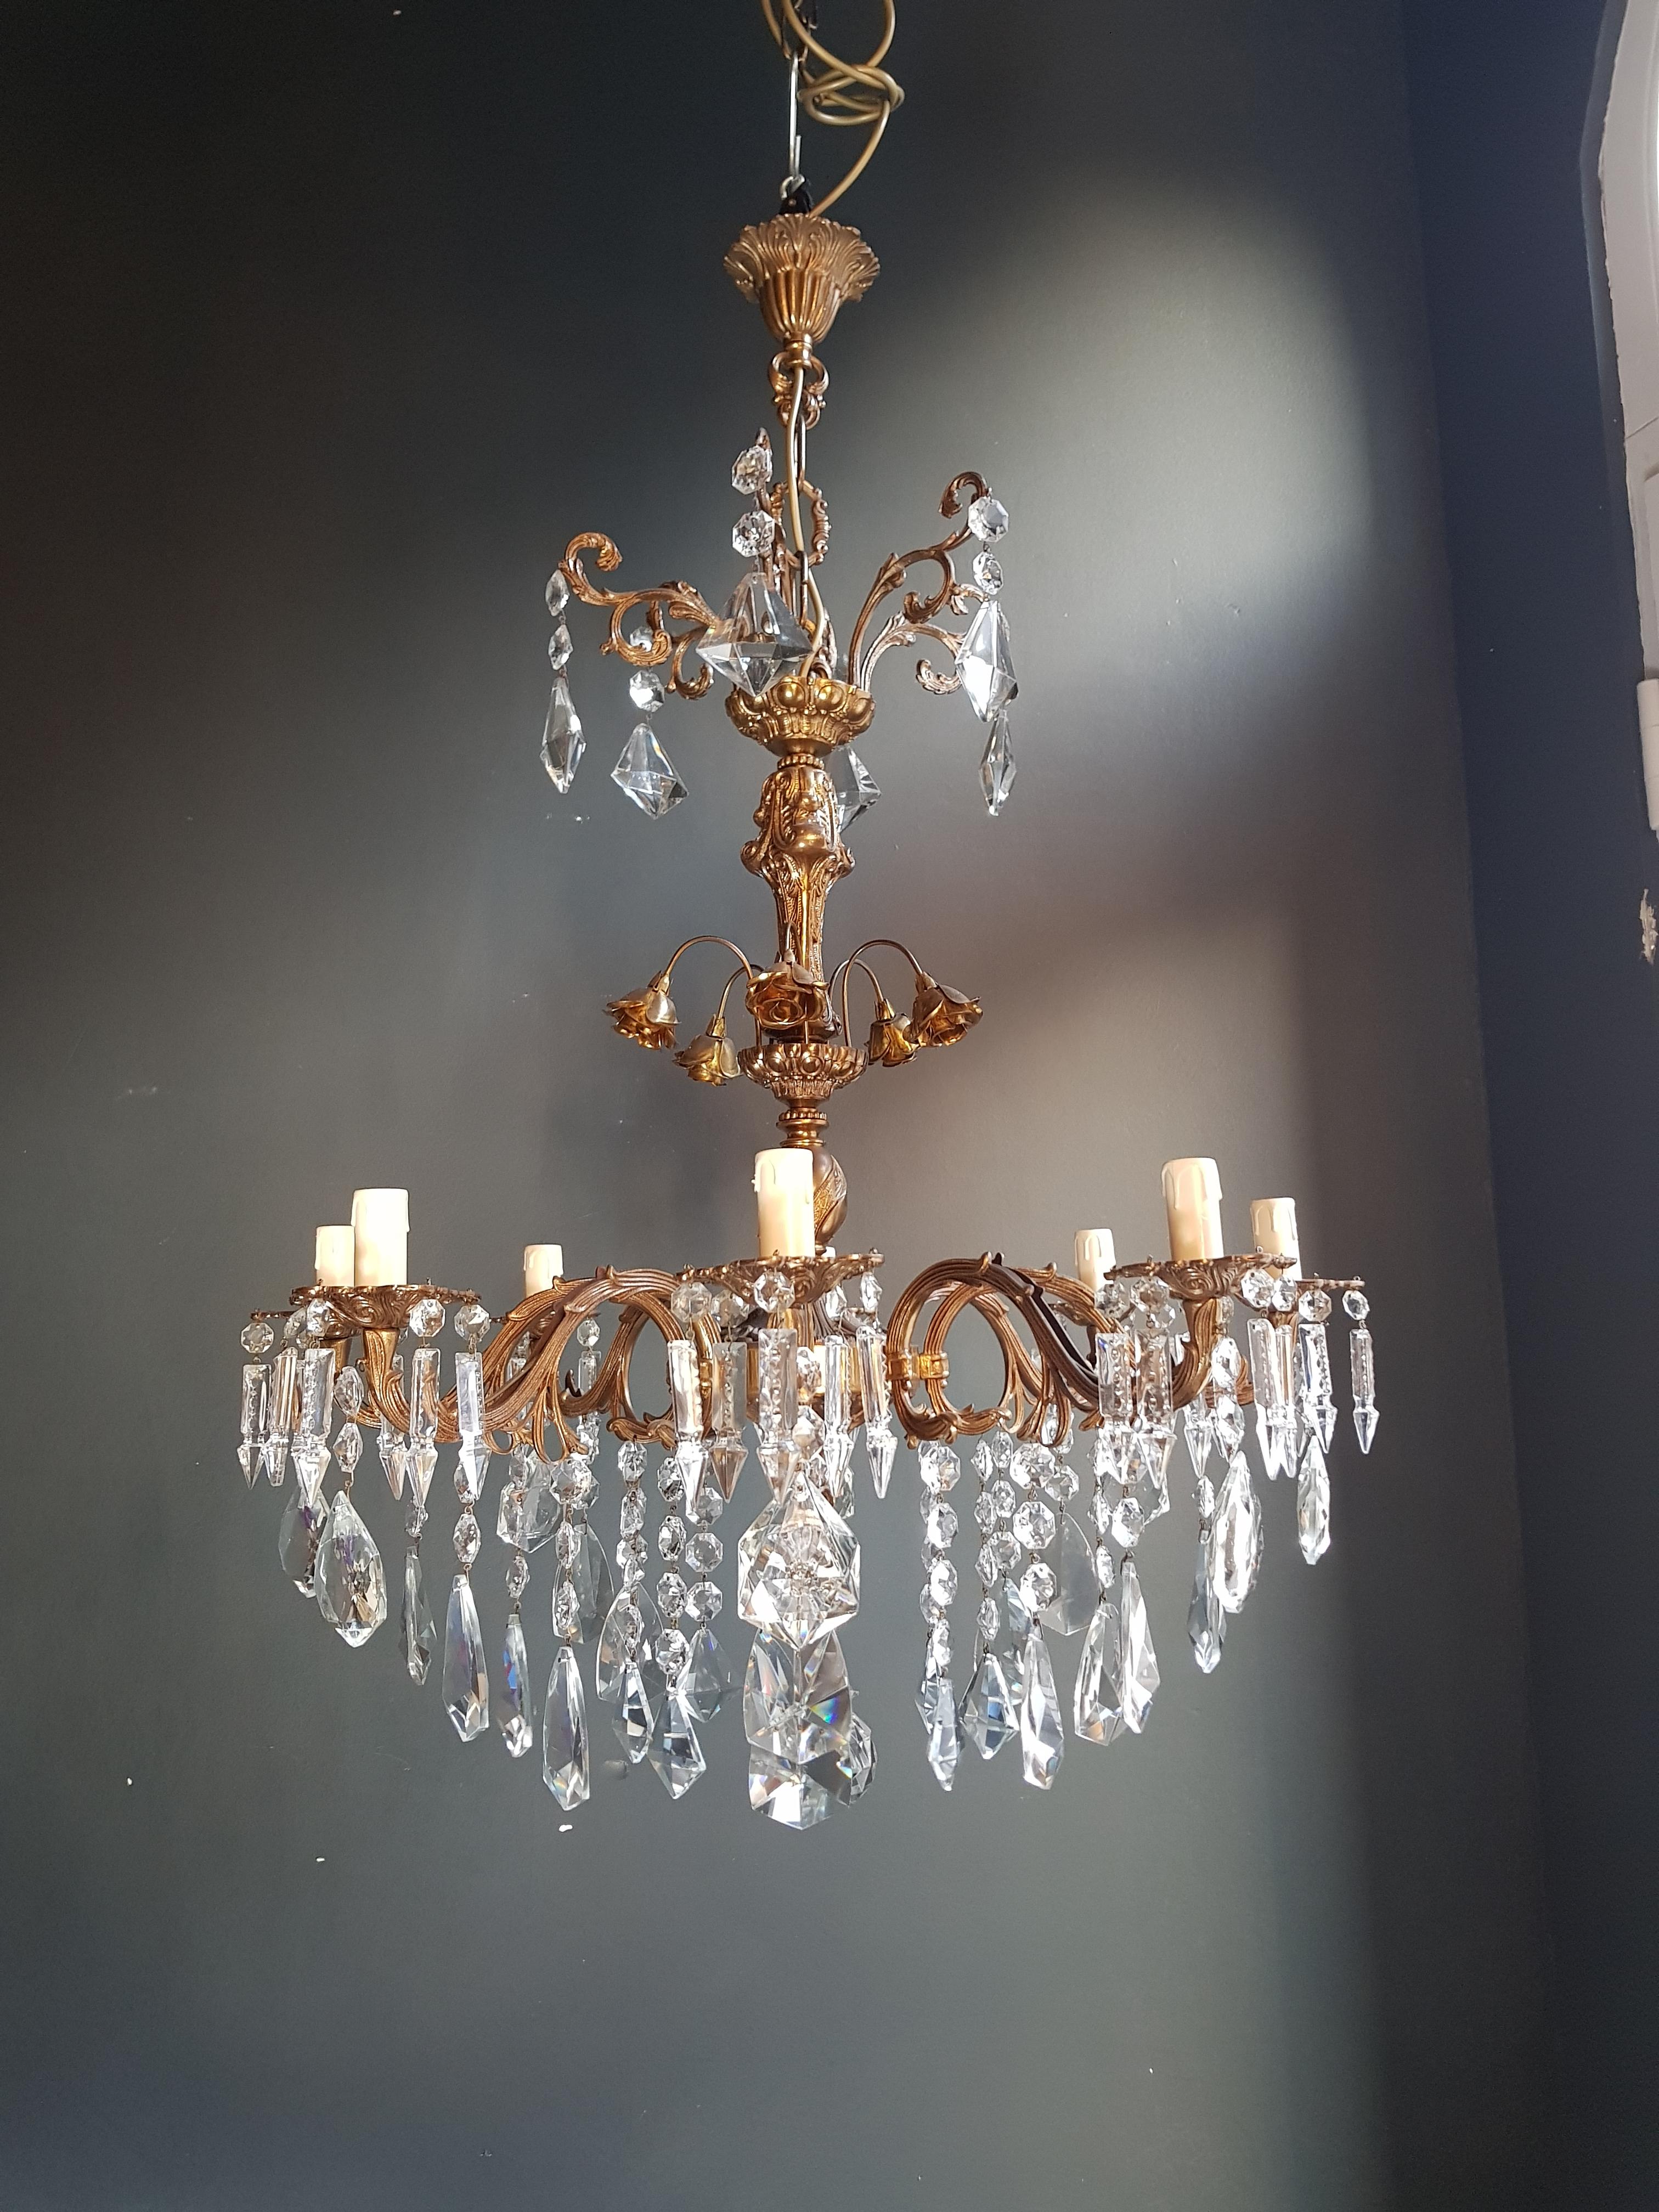 Original preserved chandelier, circa 1950. Cabling and sockets completely renewed. Crystal hand knotted
Measures: Total height: 110 cm, height without chain: 83 cm, diameter 70 cm, weight (approximately) 15 kg.

Number of lights: 8 -light Bulub